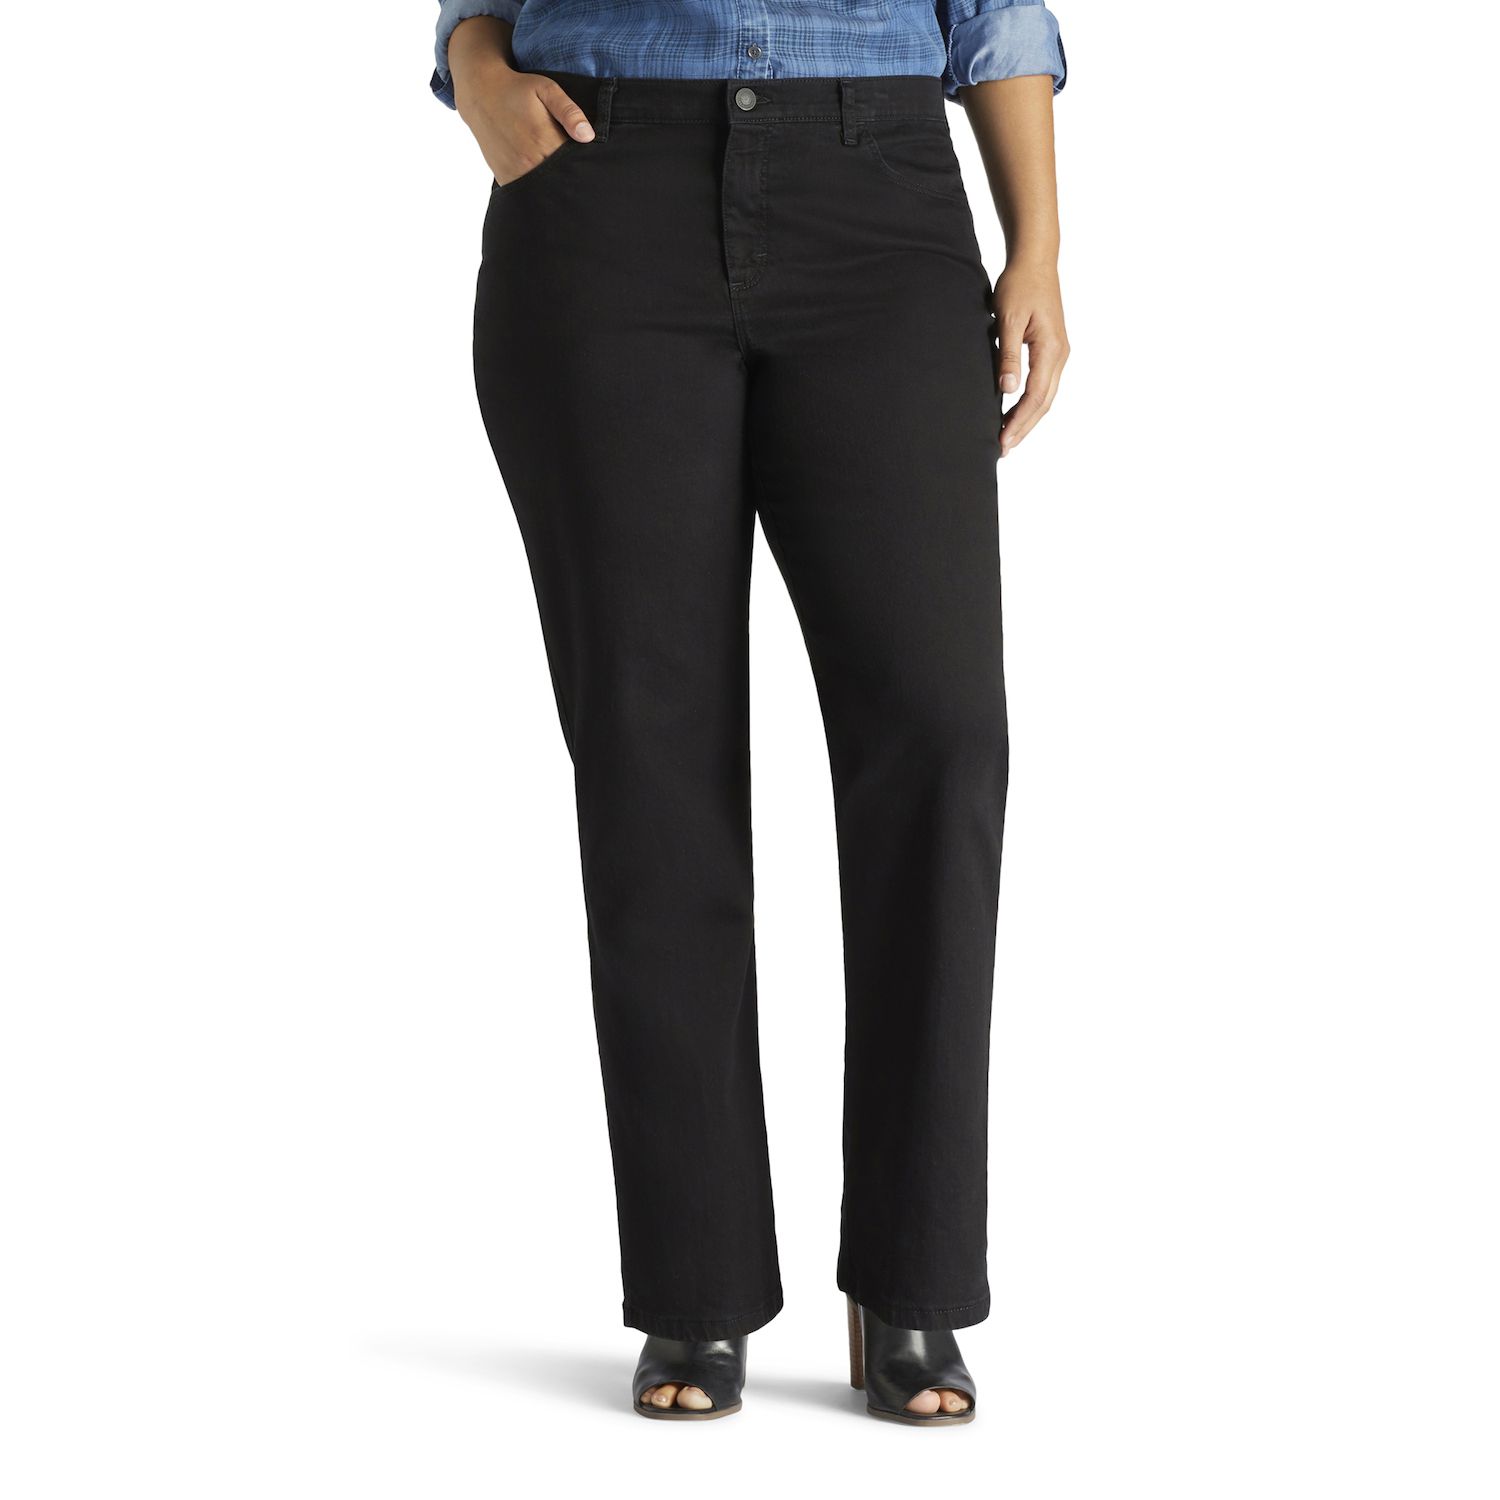 Image for Lee Plus Size Instantly Slims Straight-Leg Jeans at Kohl's.